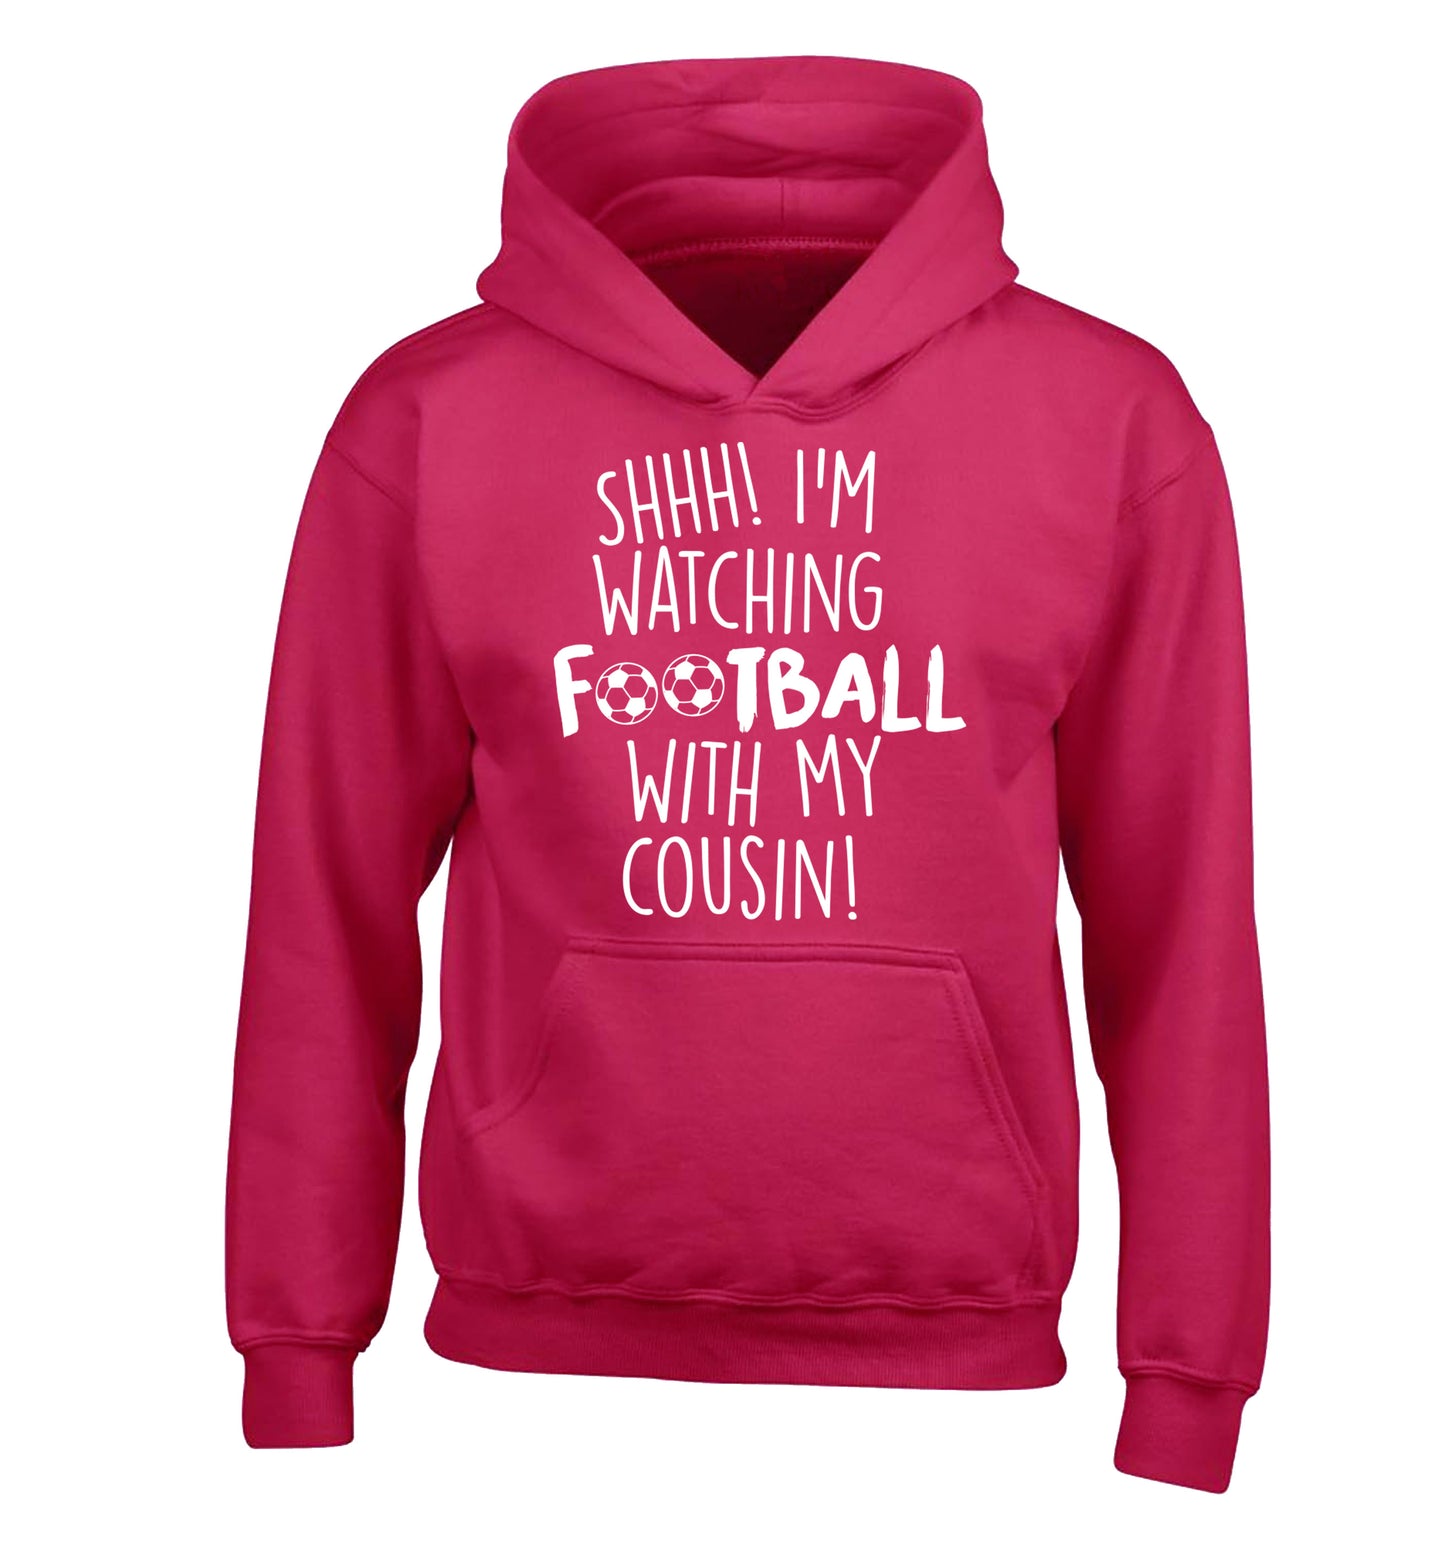 Shhh I'm watching football with my cousin children's pink hoodie 12-14 Years